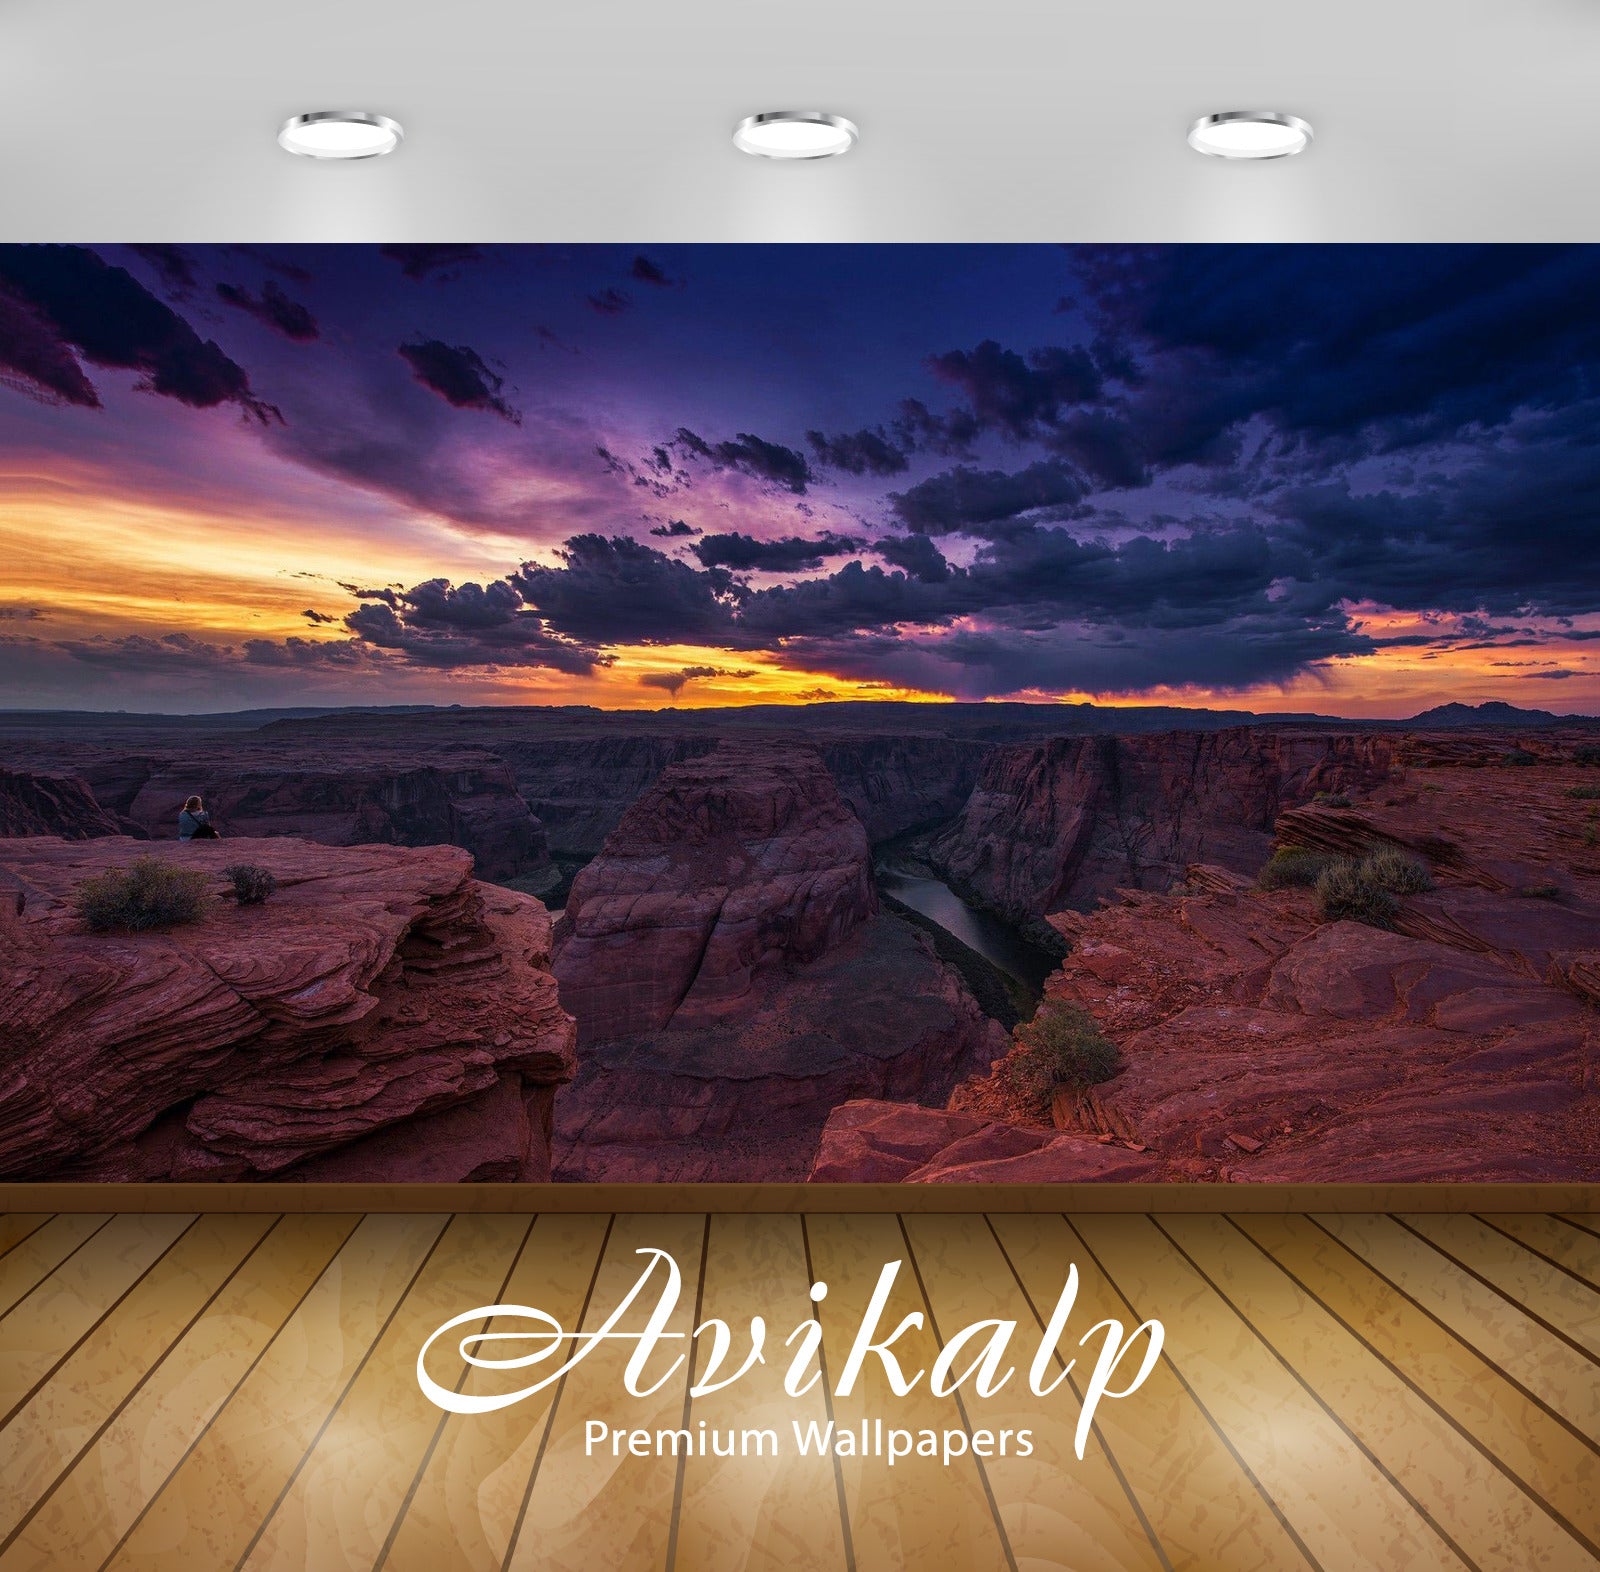 Avikalp Exclusive Awi5530 Grand Canyon Nature Full HD Wallpapers for Living room, Hall, Kids Room, K